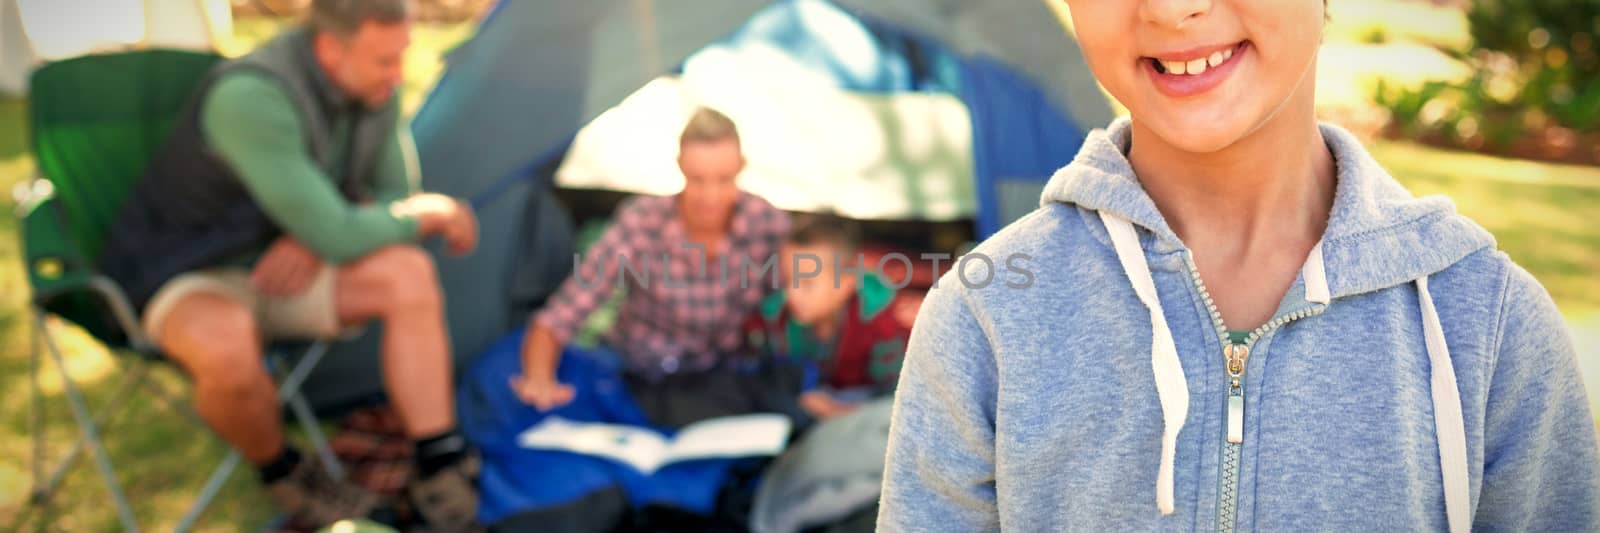 Girl smiling at camera while family sitting at tent in background by Wavebreakmedia